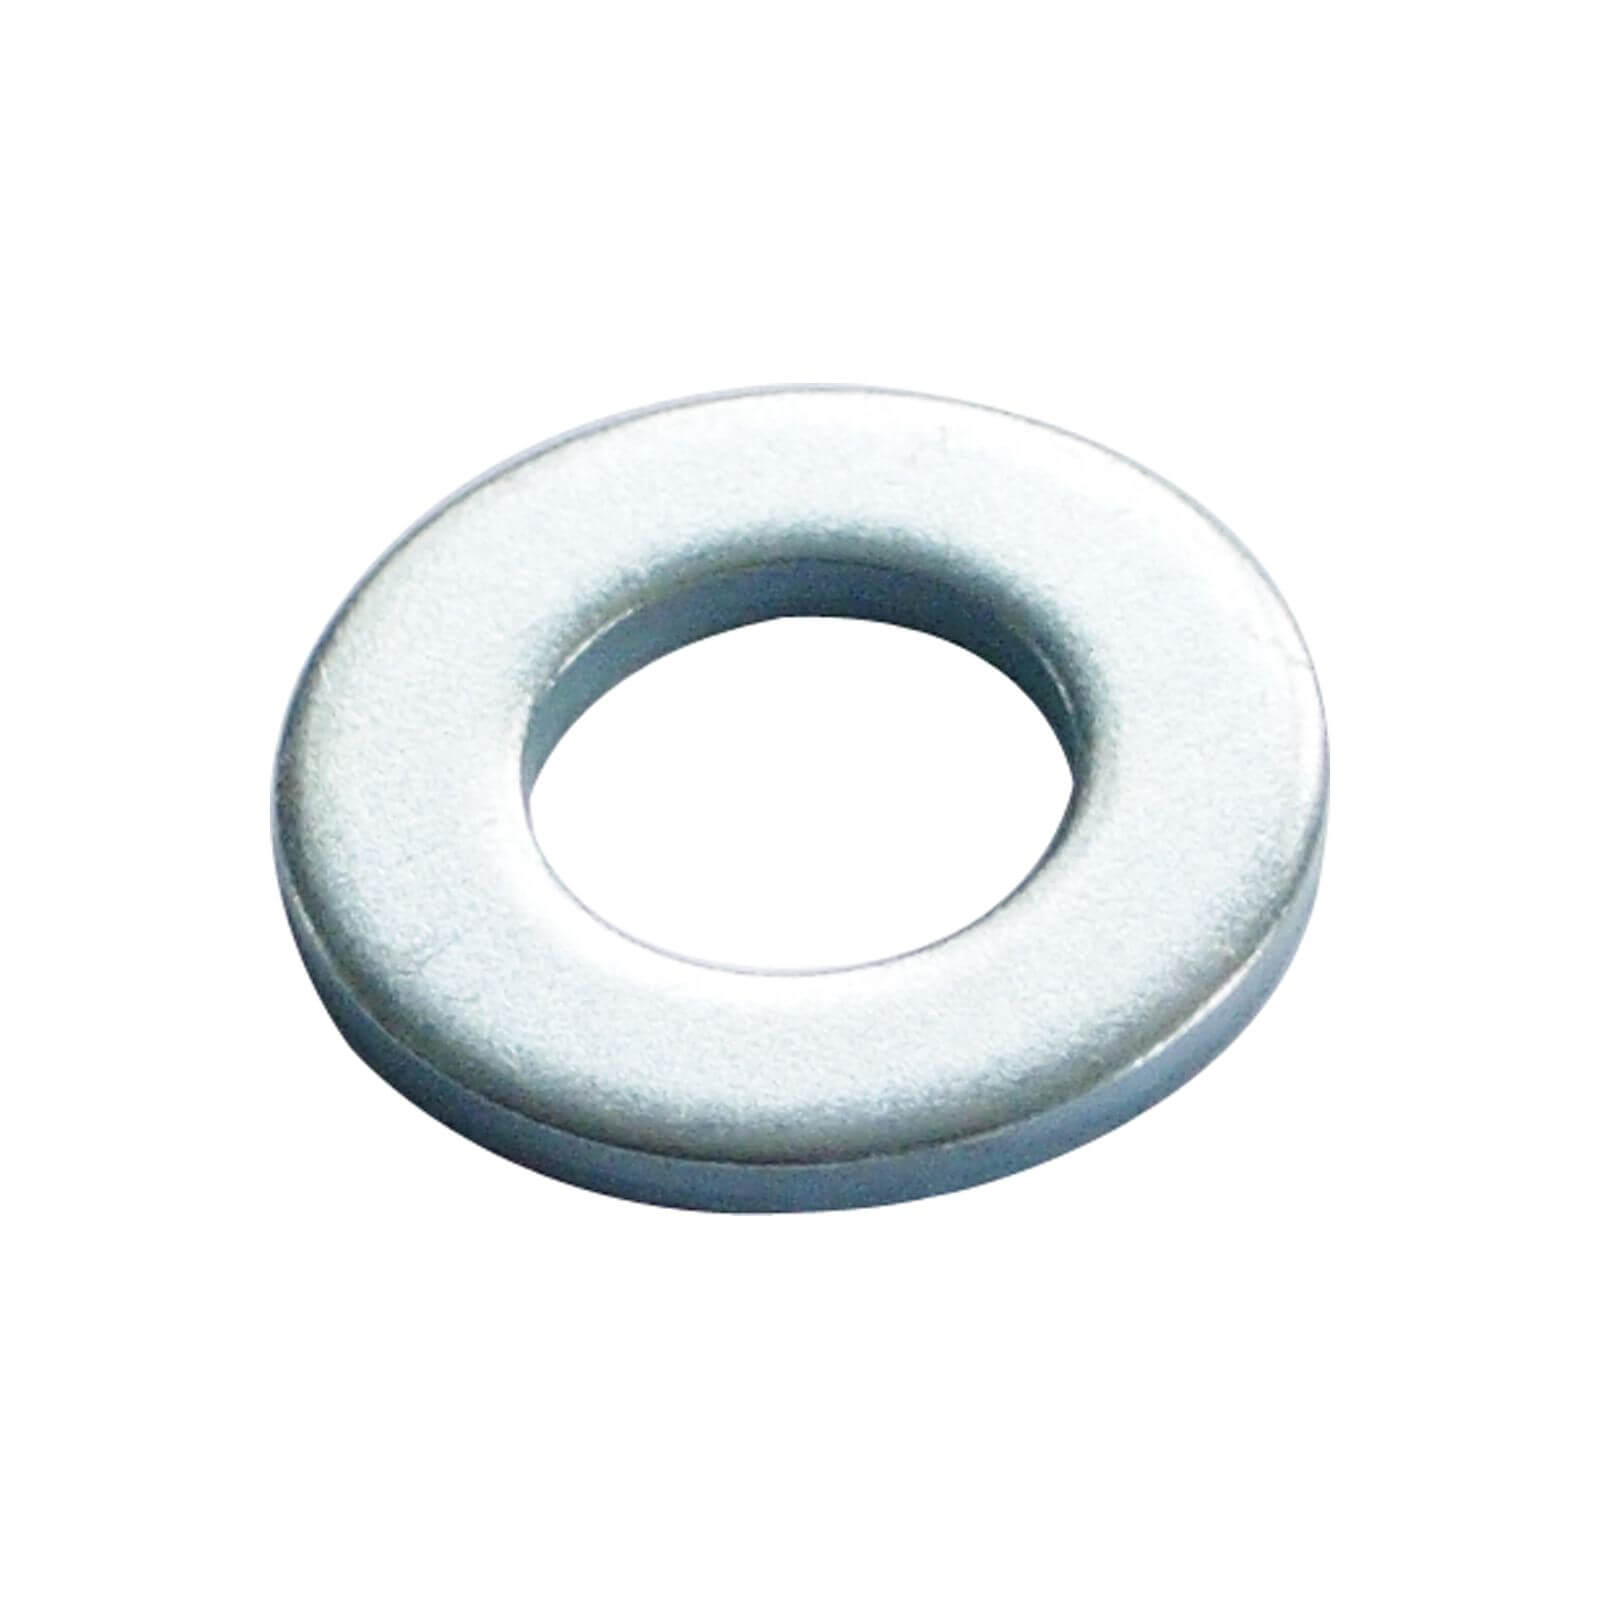 Washer - Bright Zinc Plated - M8 - 25 Pack